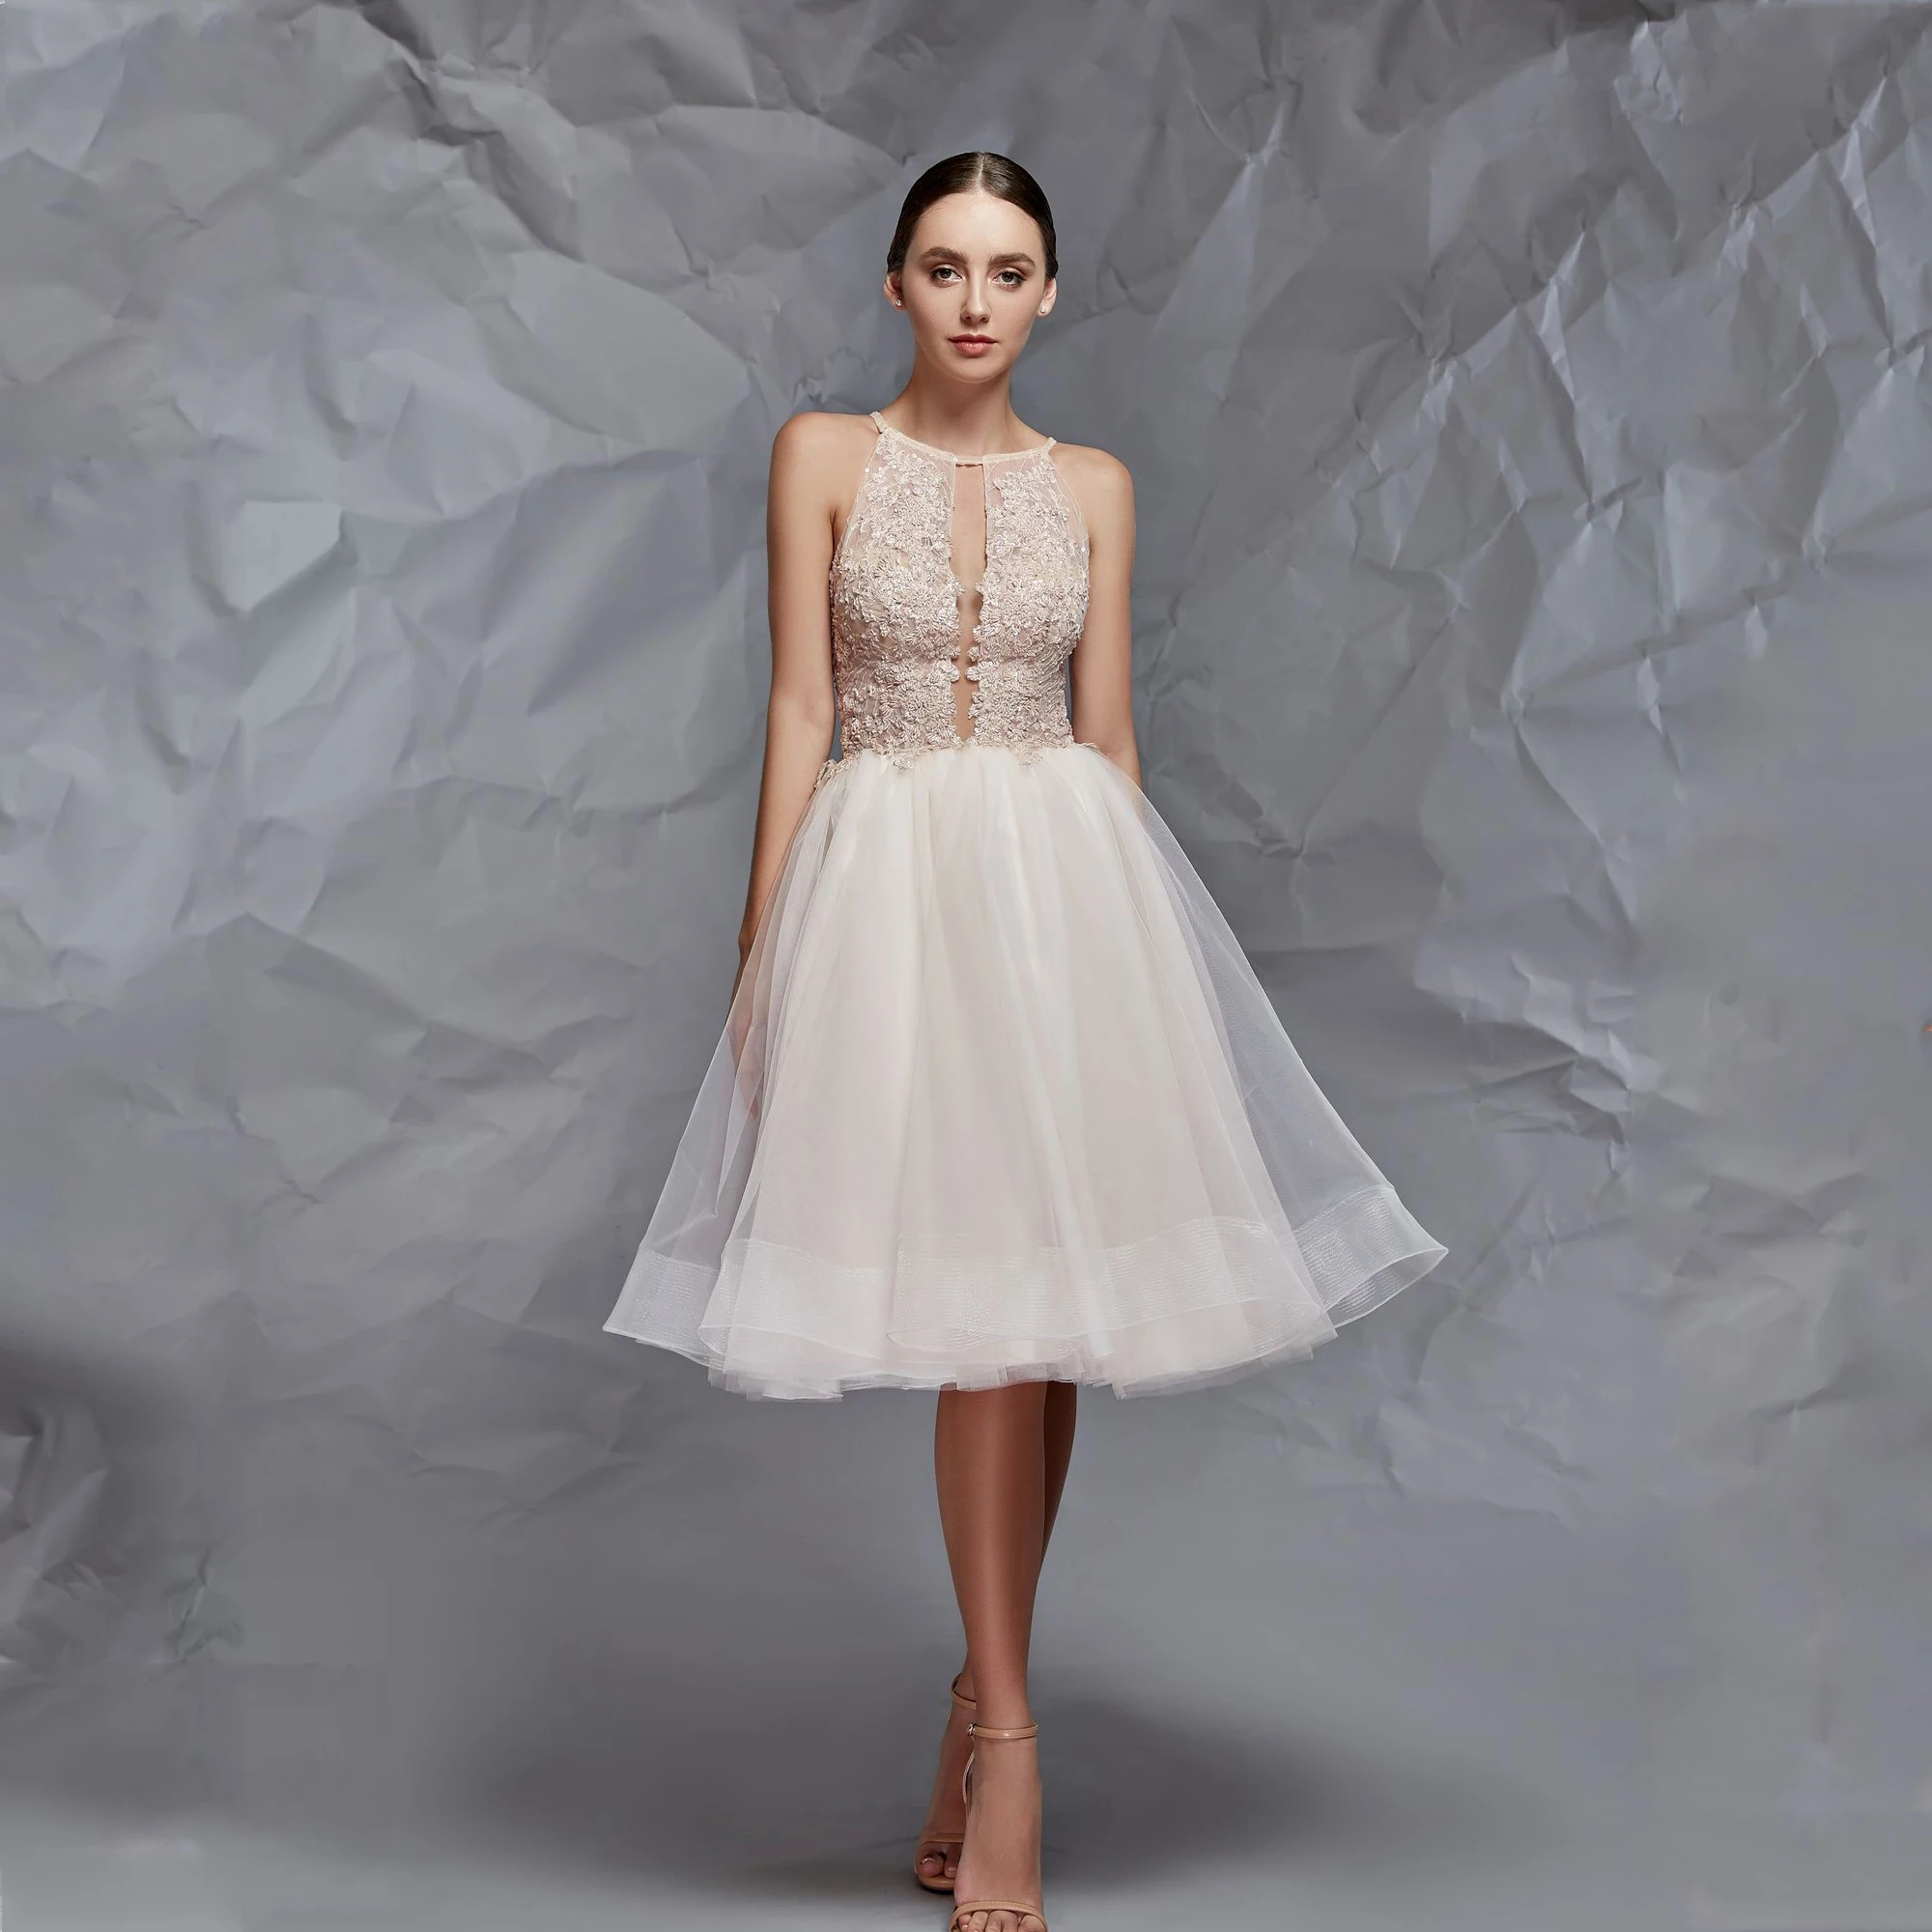 

Pretty Elegant Short Homecoming Dresses 2021 O Neck Sleeveless Appliques Tulle Ball Gown Knee Length Women Cocktail Party Gowns